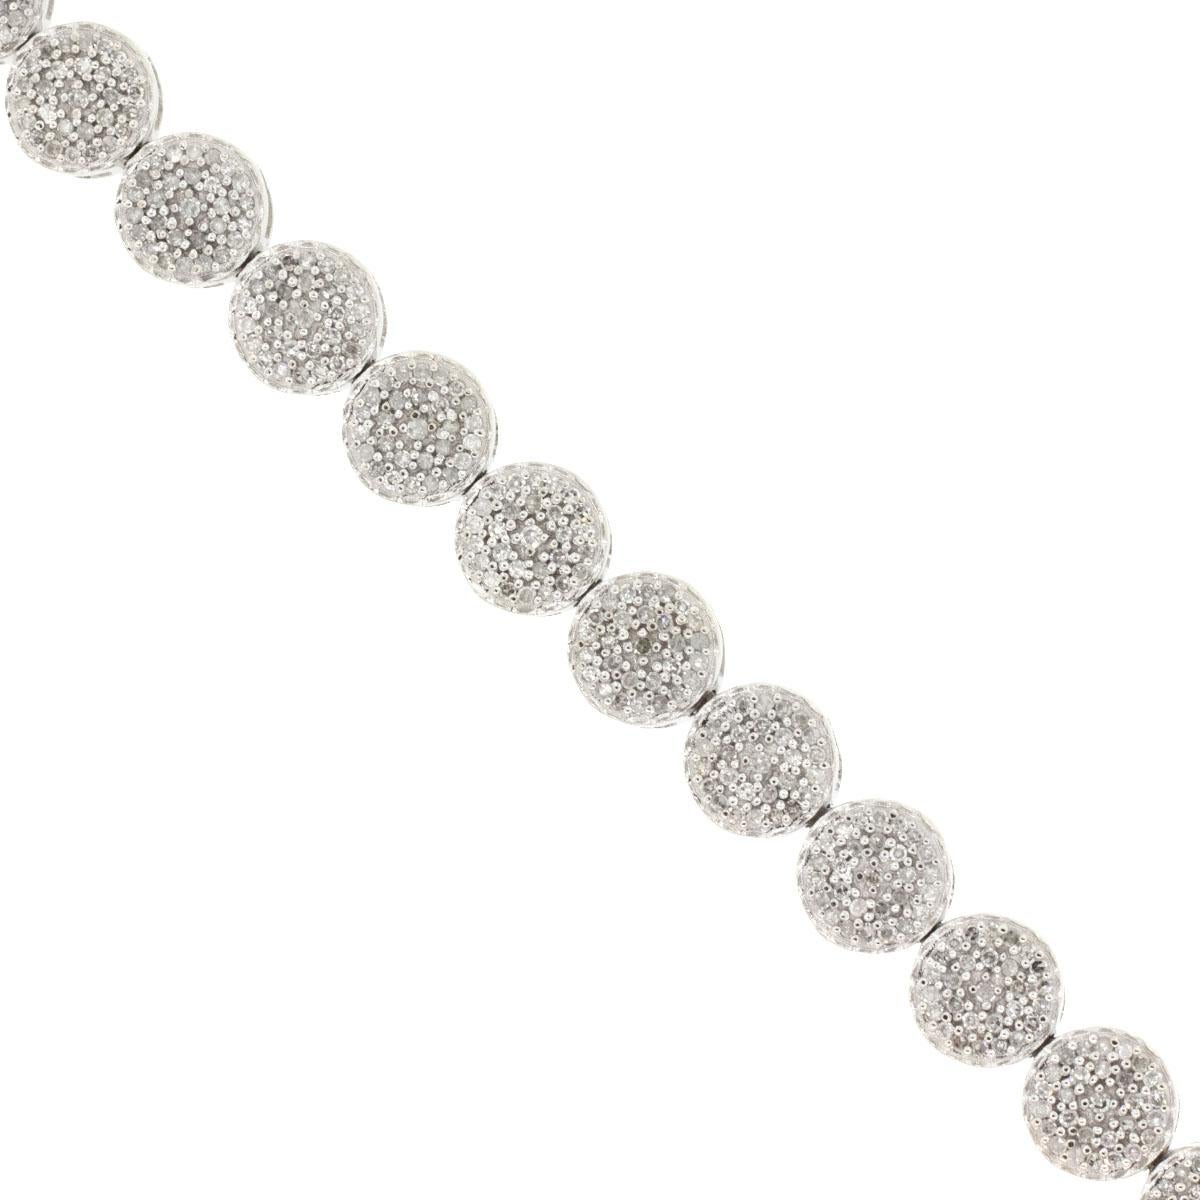 14k White Gold 15ctw Round Diamond Pave Necklace

Elevate your elegance with this exquisite 14k White Gold 15ctw Round Diamond Pave Necklace. The luxurious diamond pave design is beautifully set in 14k white gold, showcasing approximately 15 carats